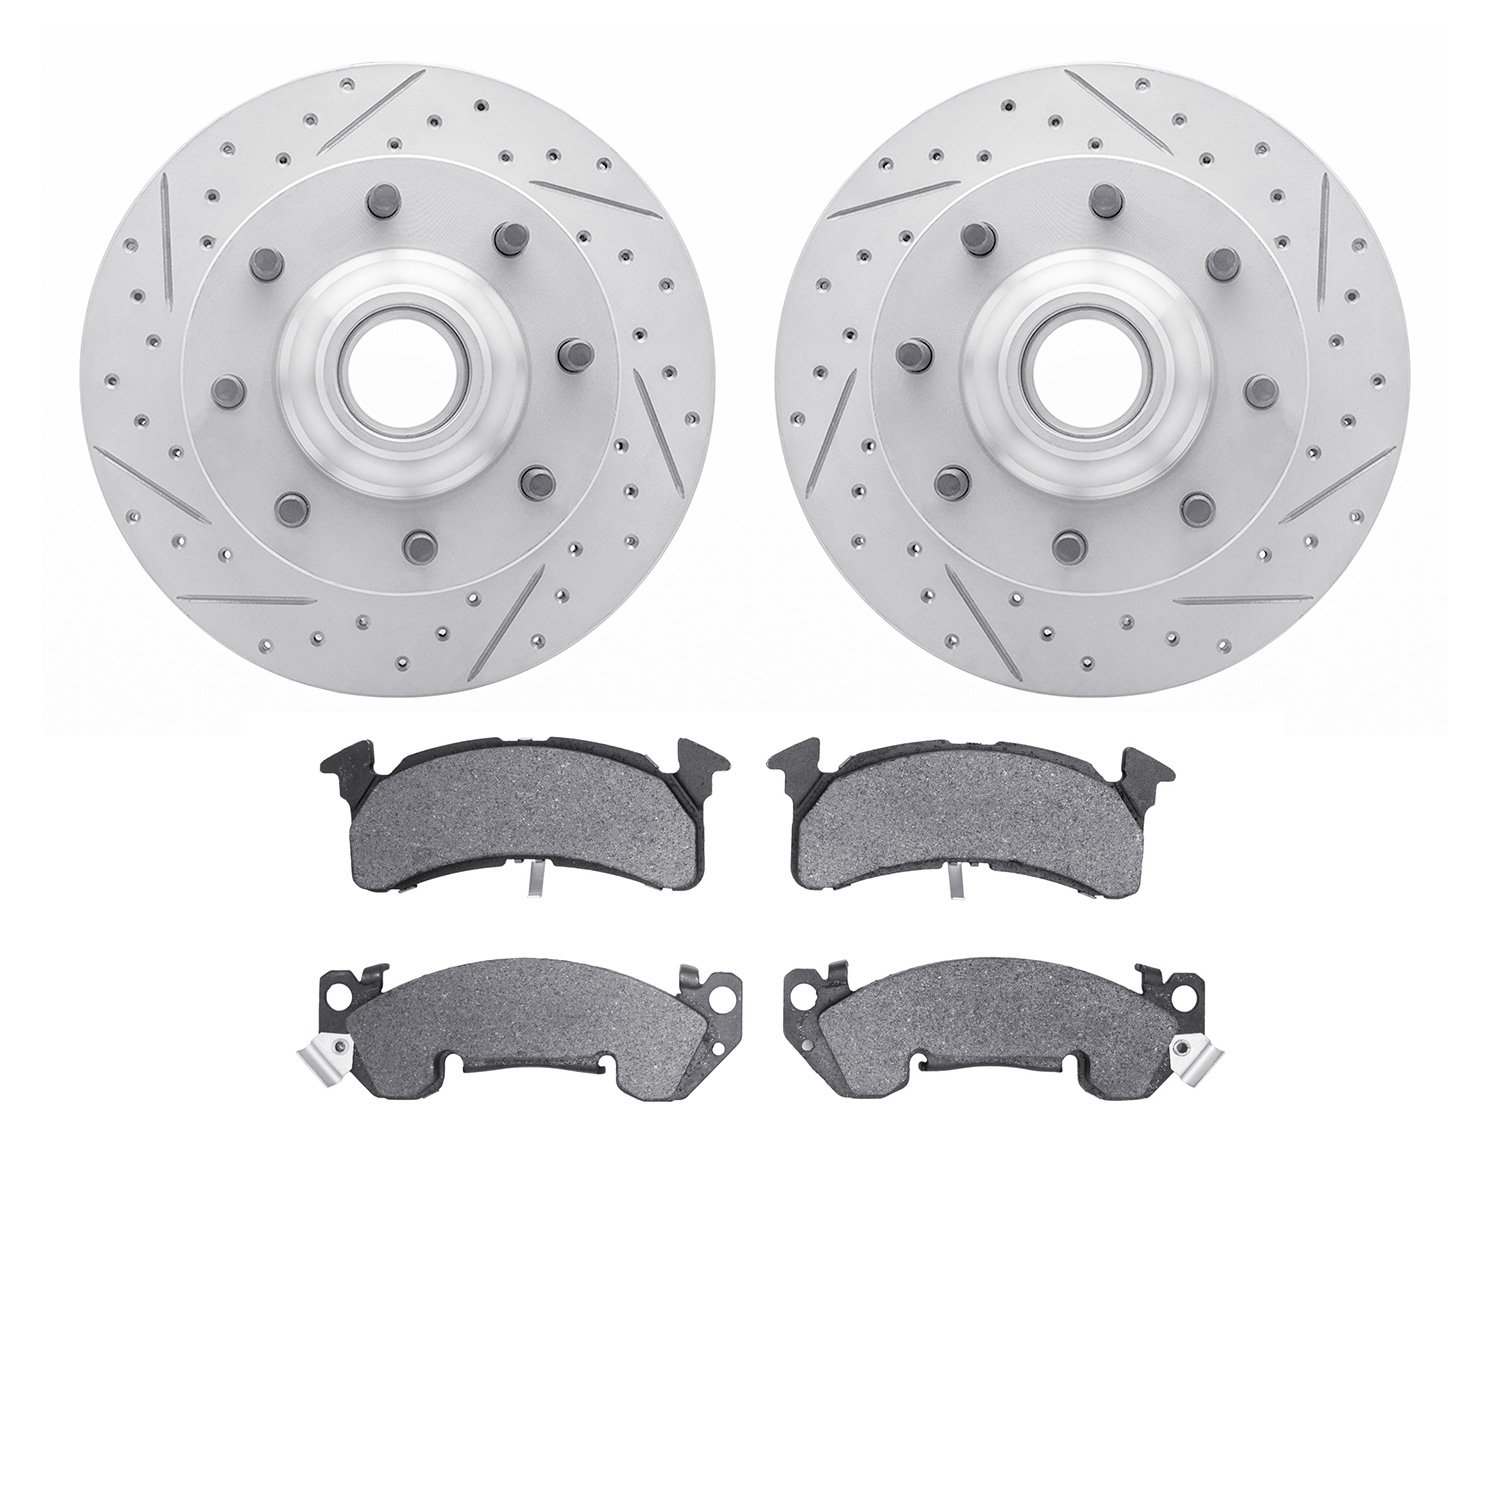 2502-48004 Geoperformance Drilled/Slotted Rotors w/5000 Advanced Brake Pads Kit, 1978-1993 GM, Position: Front